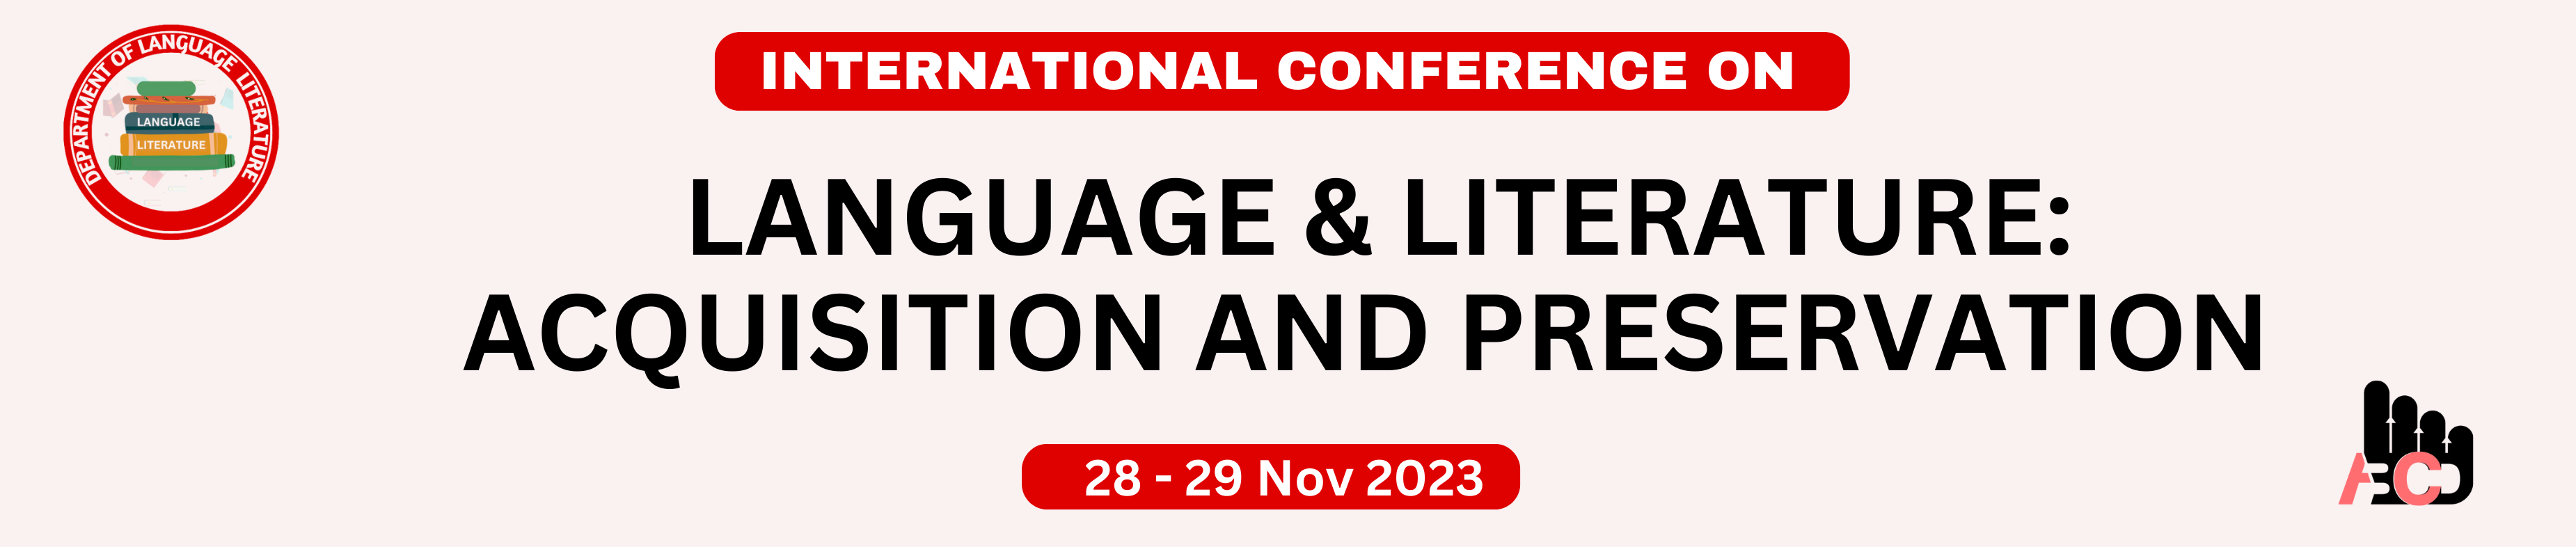 International Conference on Language & Literature: Acquisition and Preservation, Bhopal, Madhya Pradesh, India